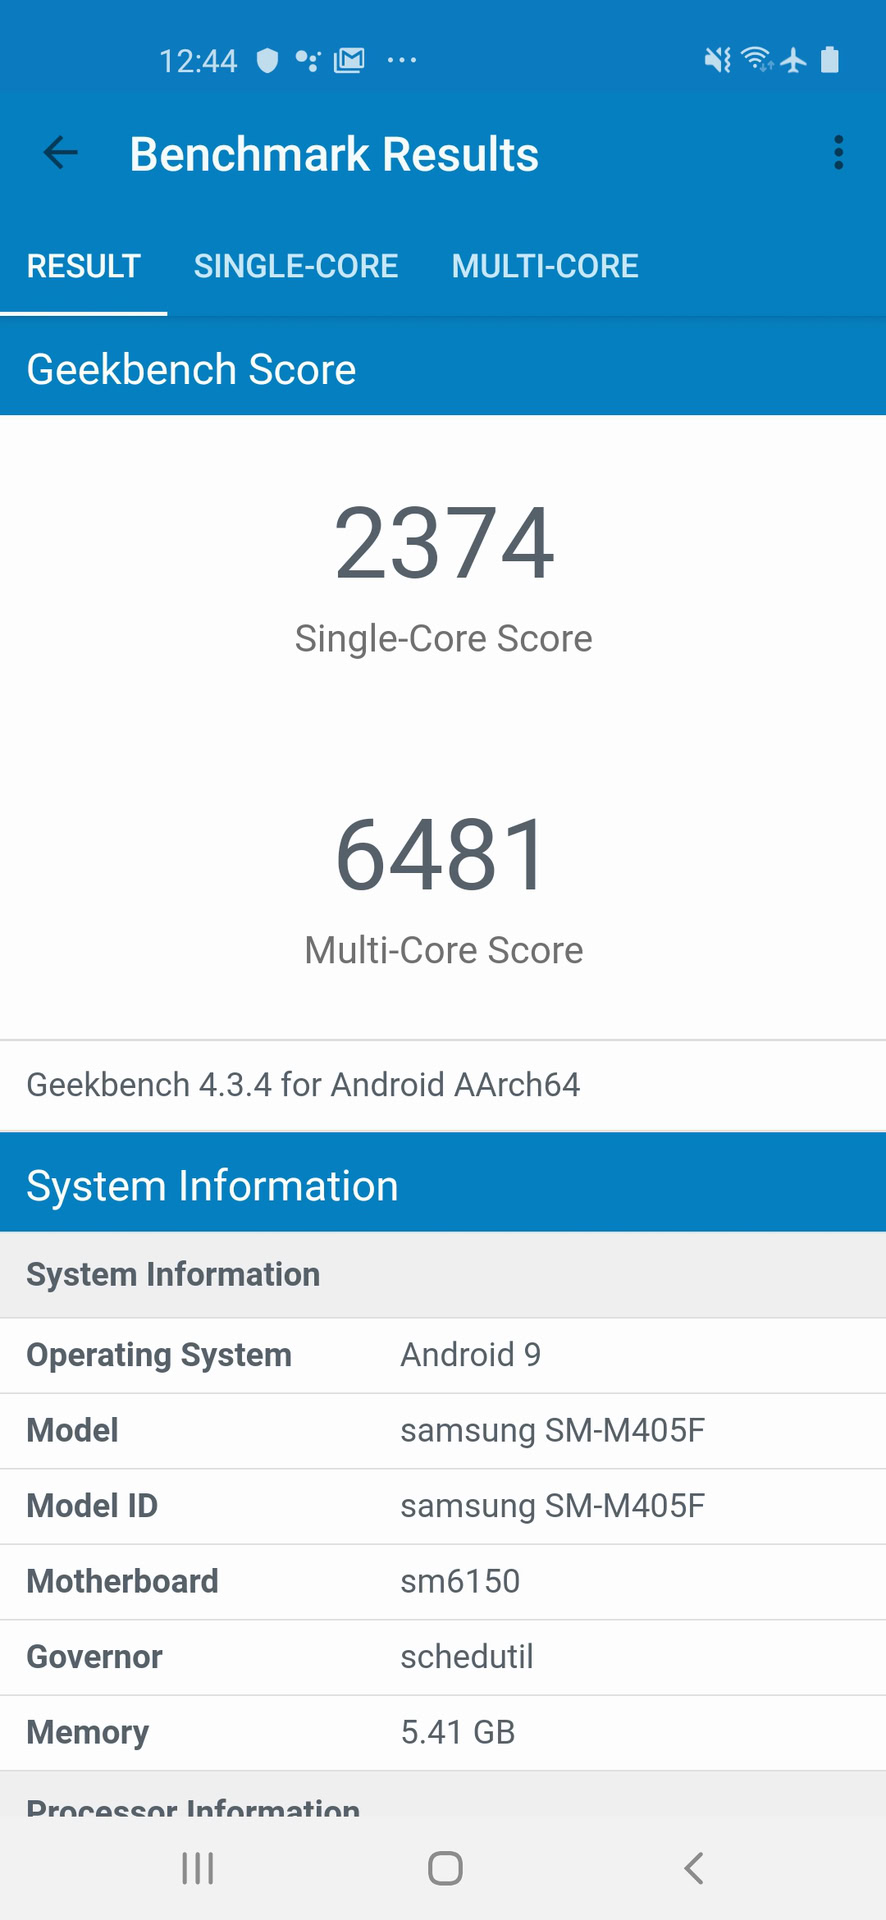 Samsung Galaxy M40 Running Android Pie Certified by Wi-Fi Alliance